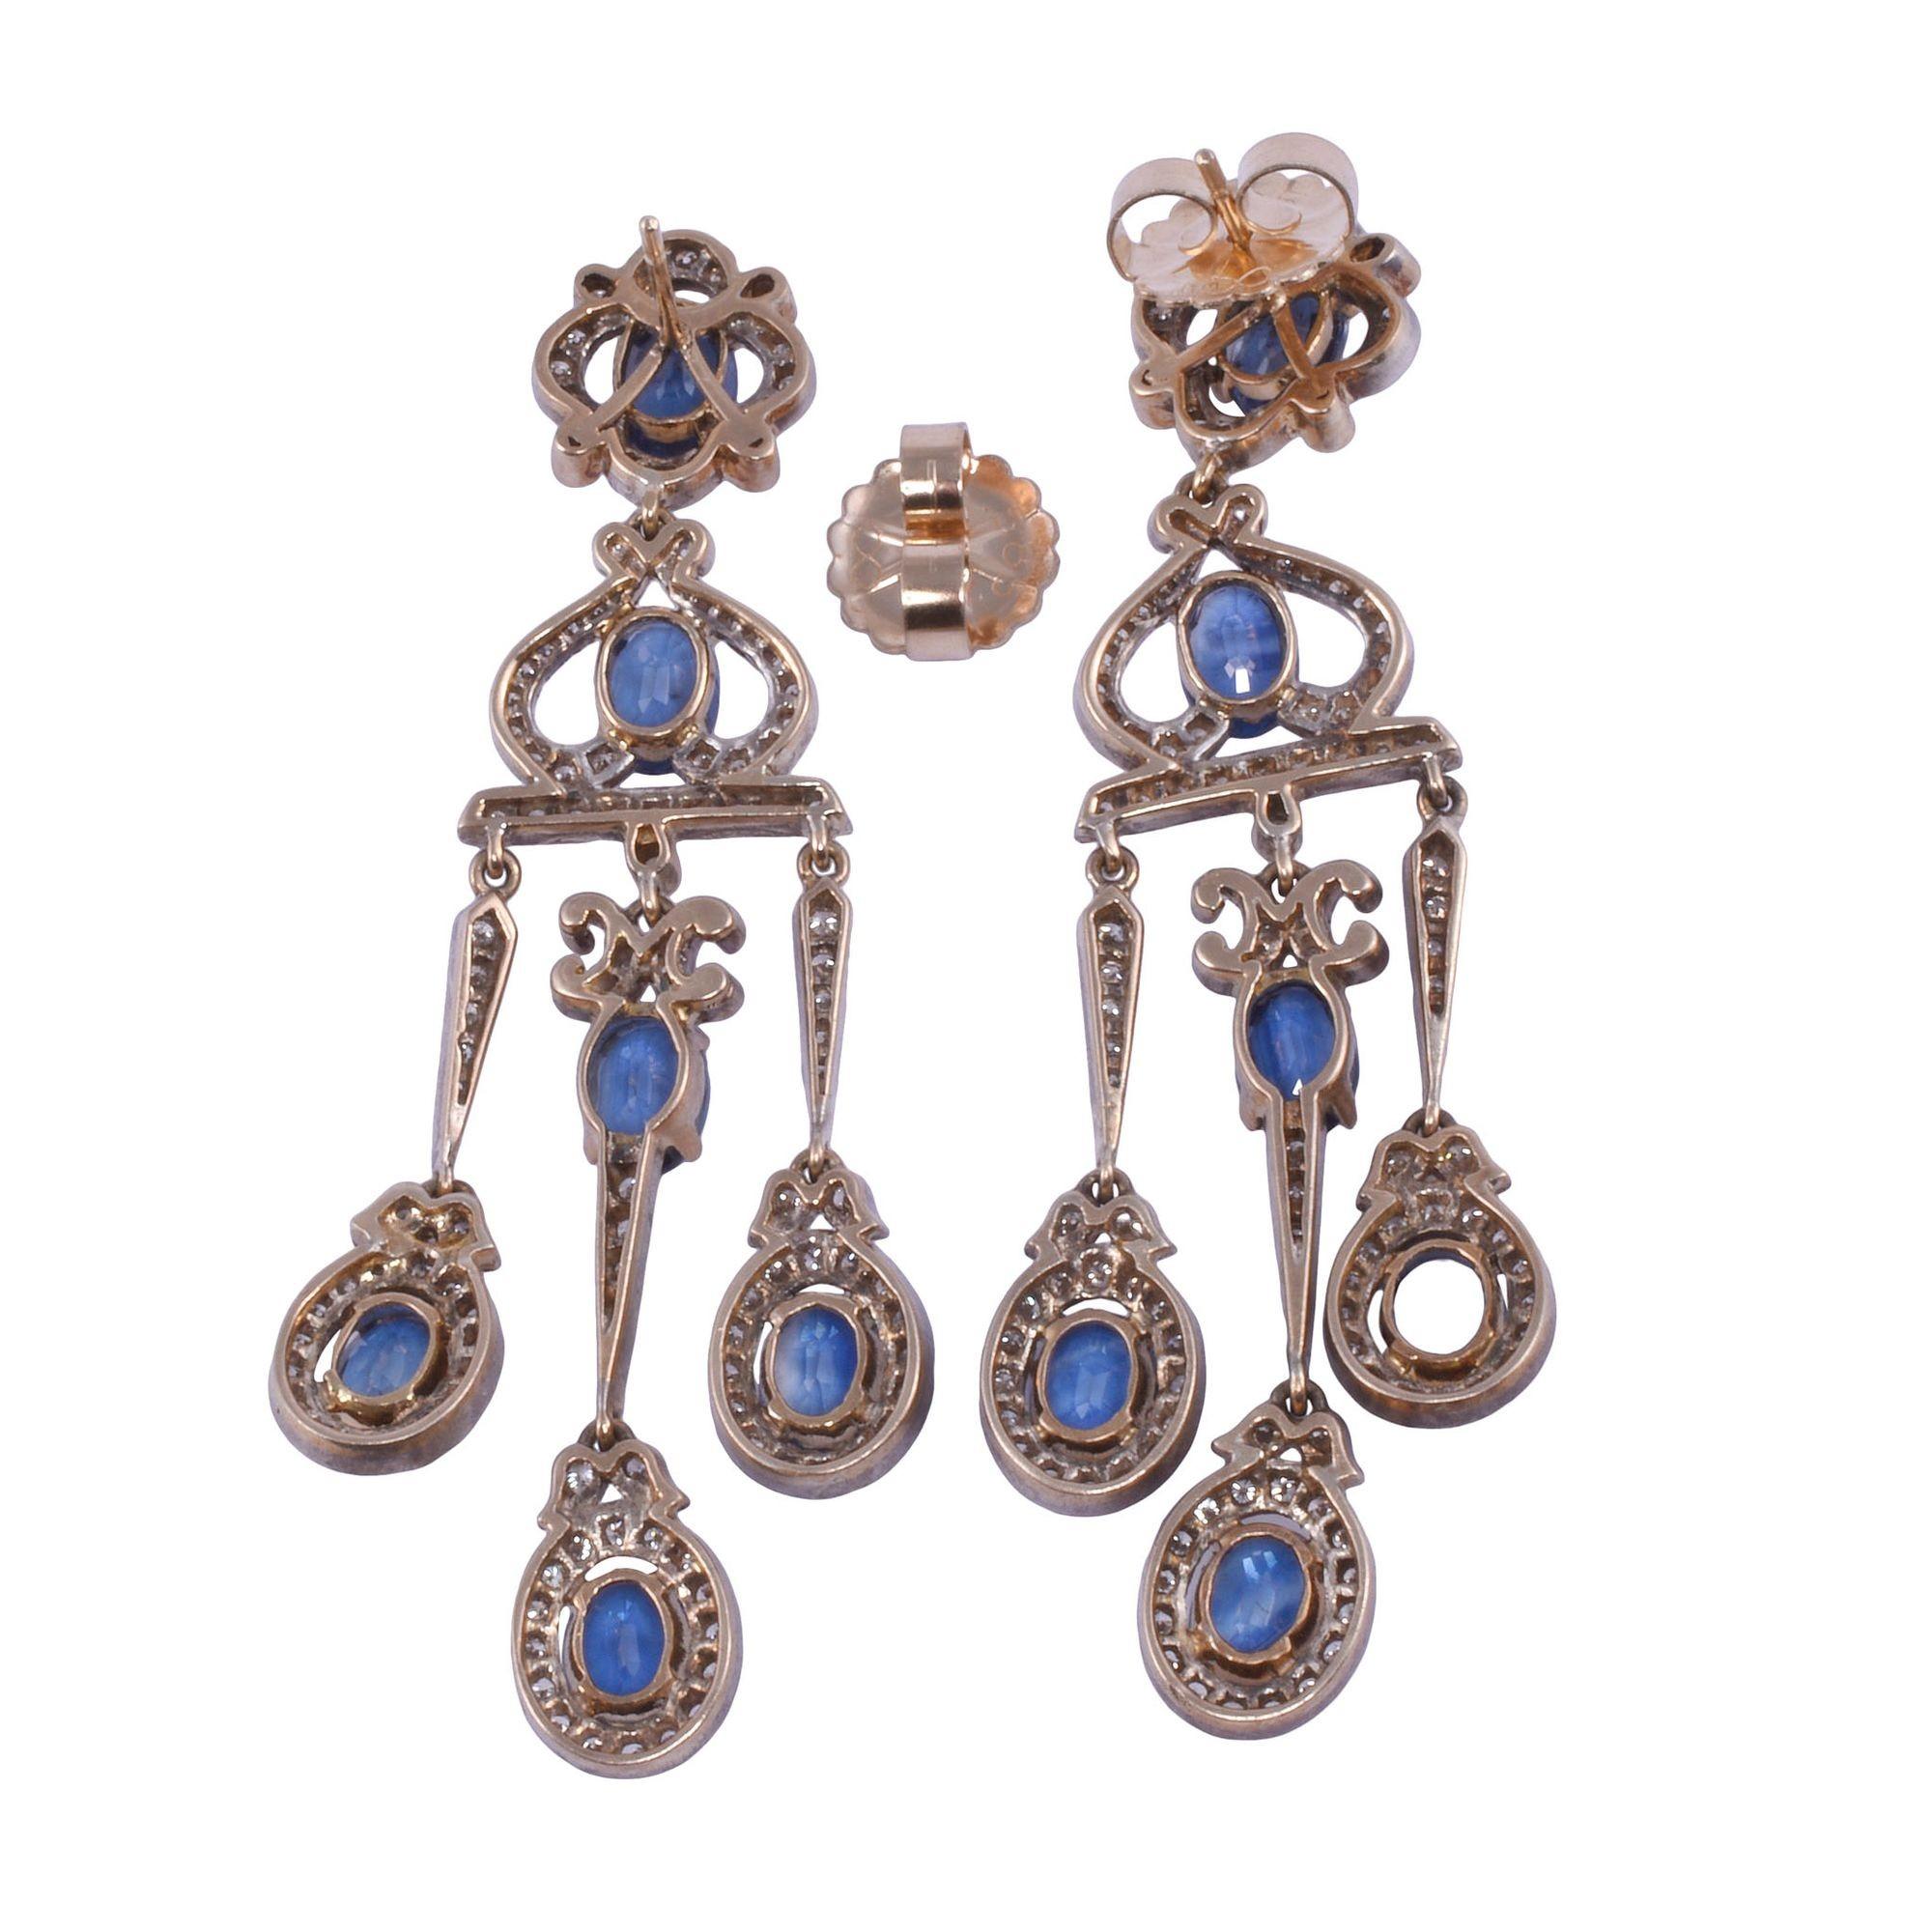 Vintage 9.71 CTW sapphire & diamond girandole dangle earrings. These Victorian style vintage earrings are crafted in 18 karat yellow gold topped with silver. They feature 9.71 CTW of oval sapphires that are very well matched, eye clean, and have